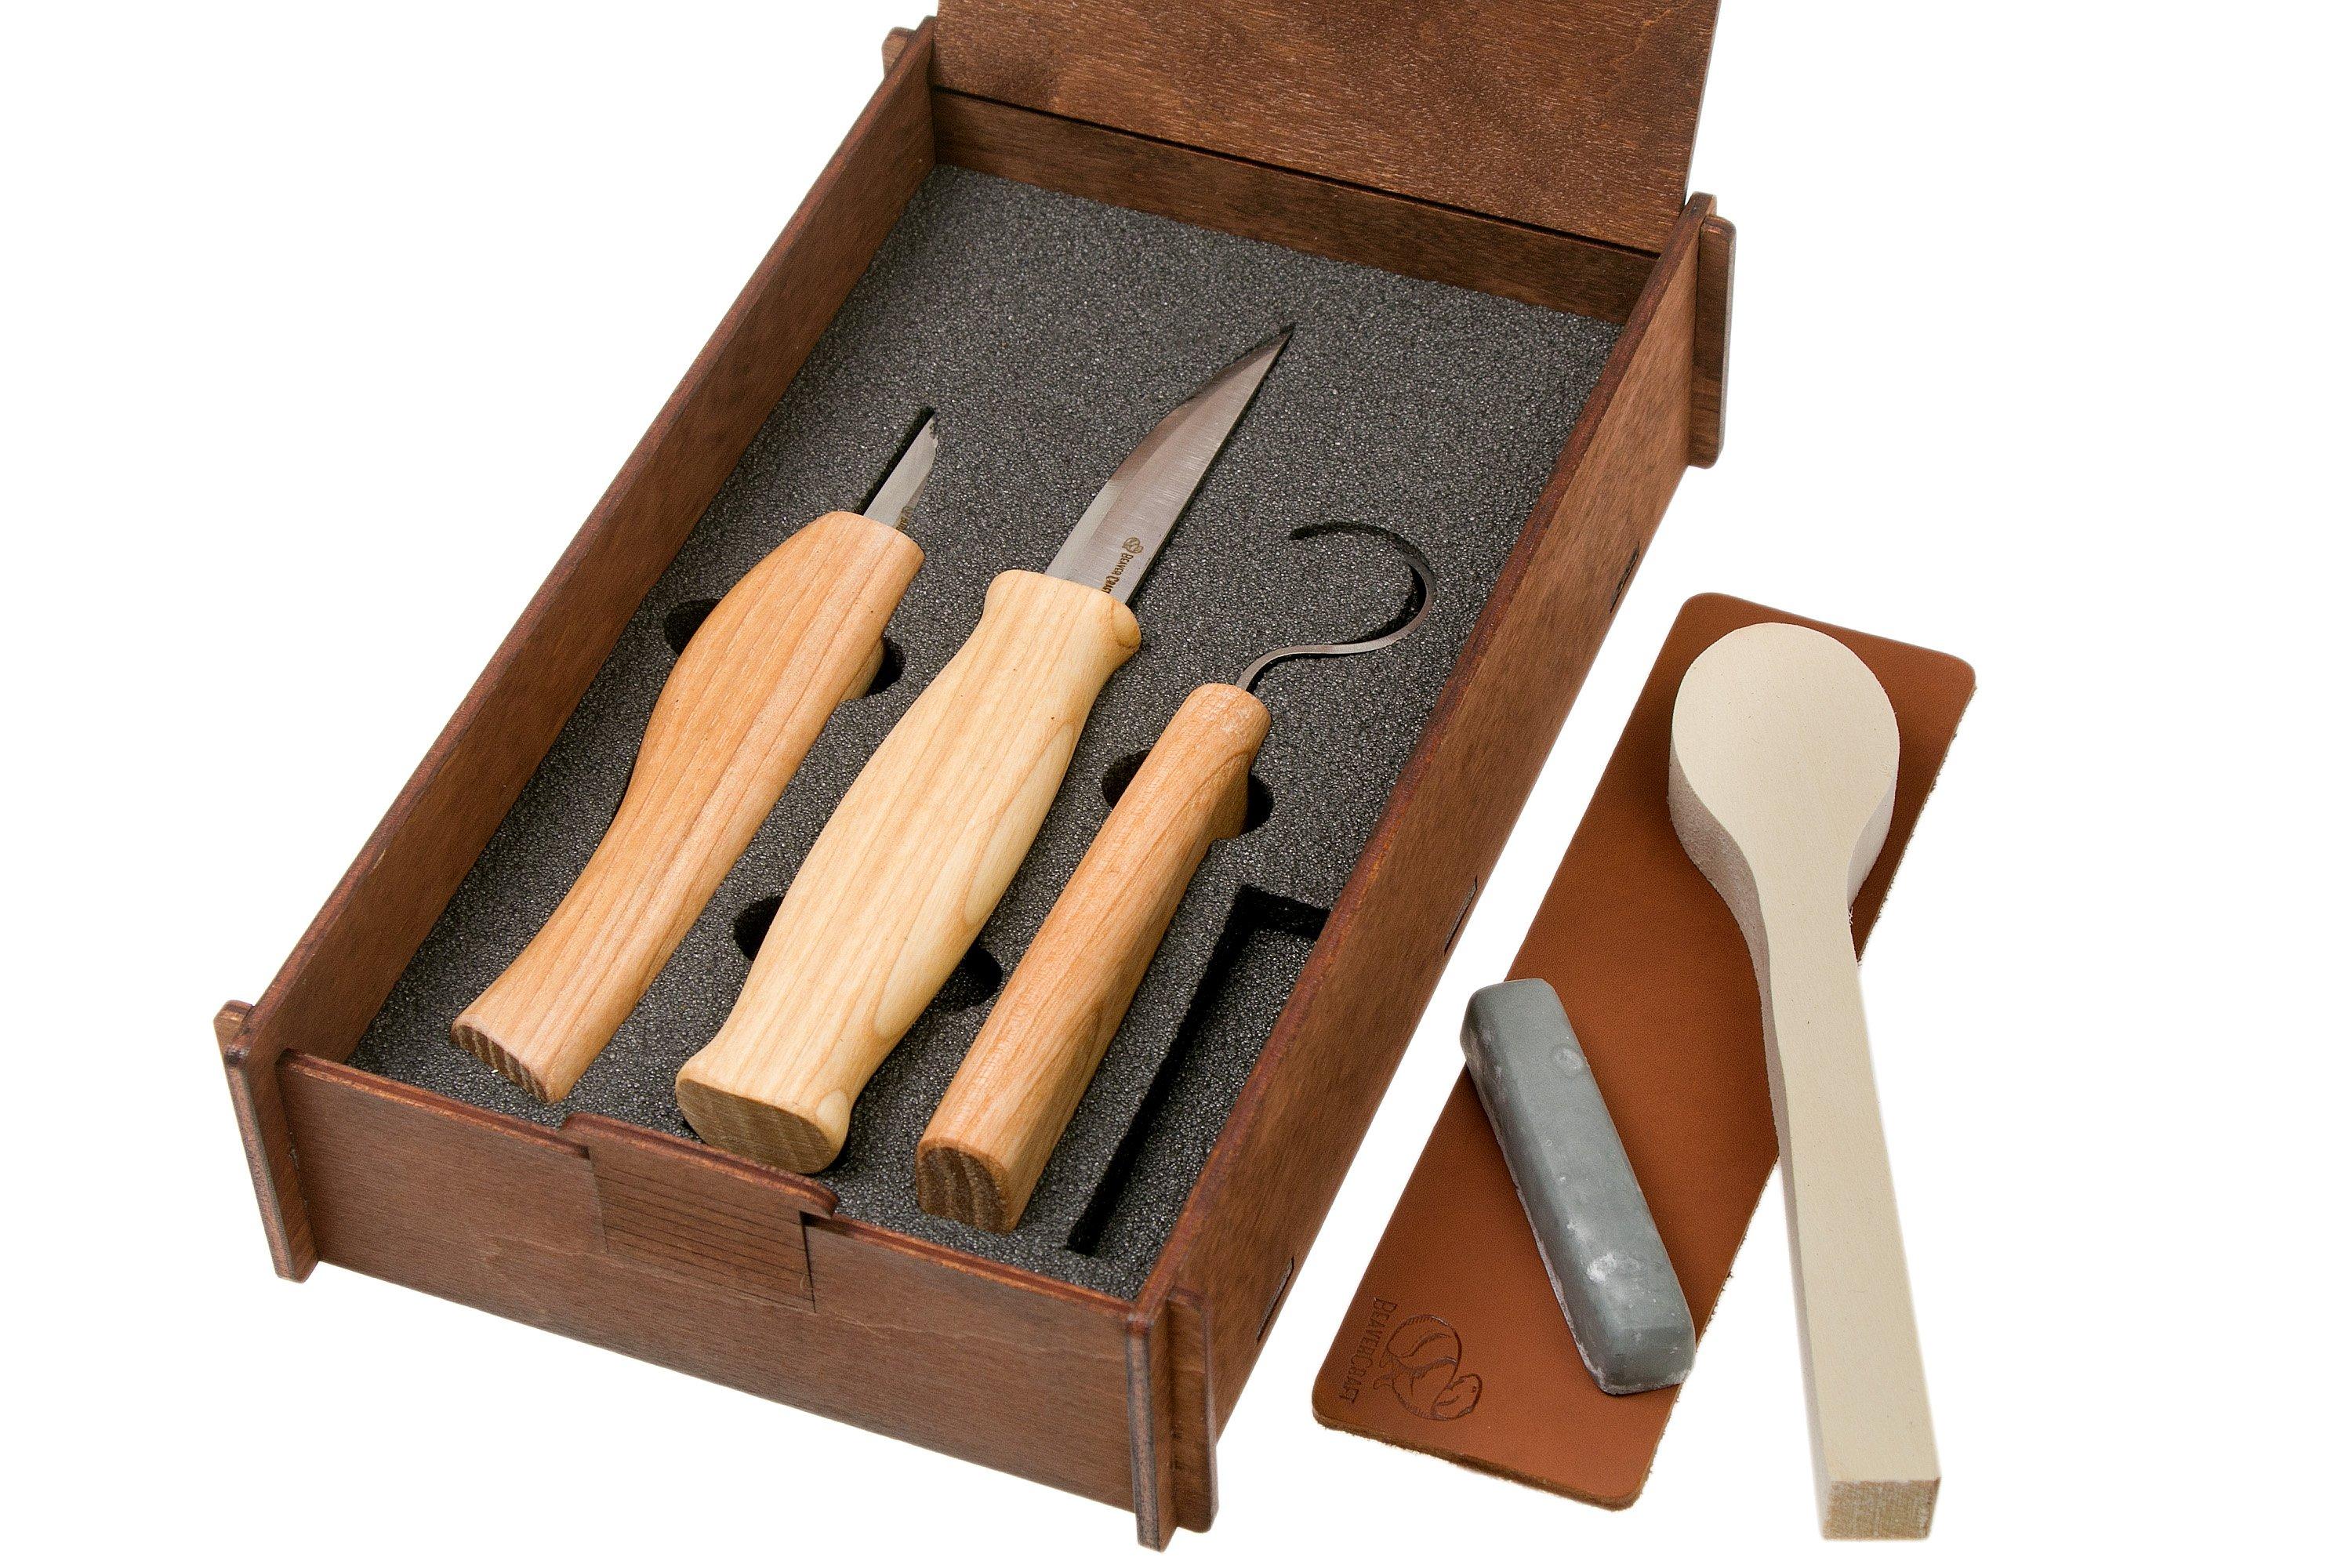 BeaverCraft Spoon Carving Tool Set S13BOX wood carving set in gift box